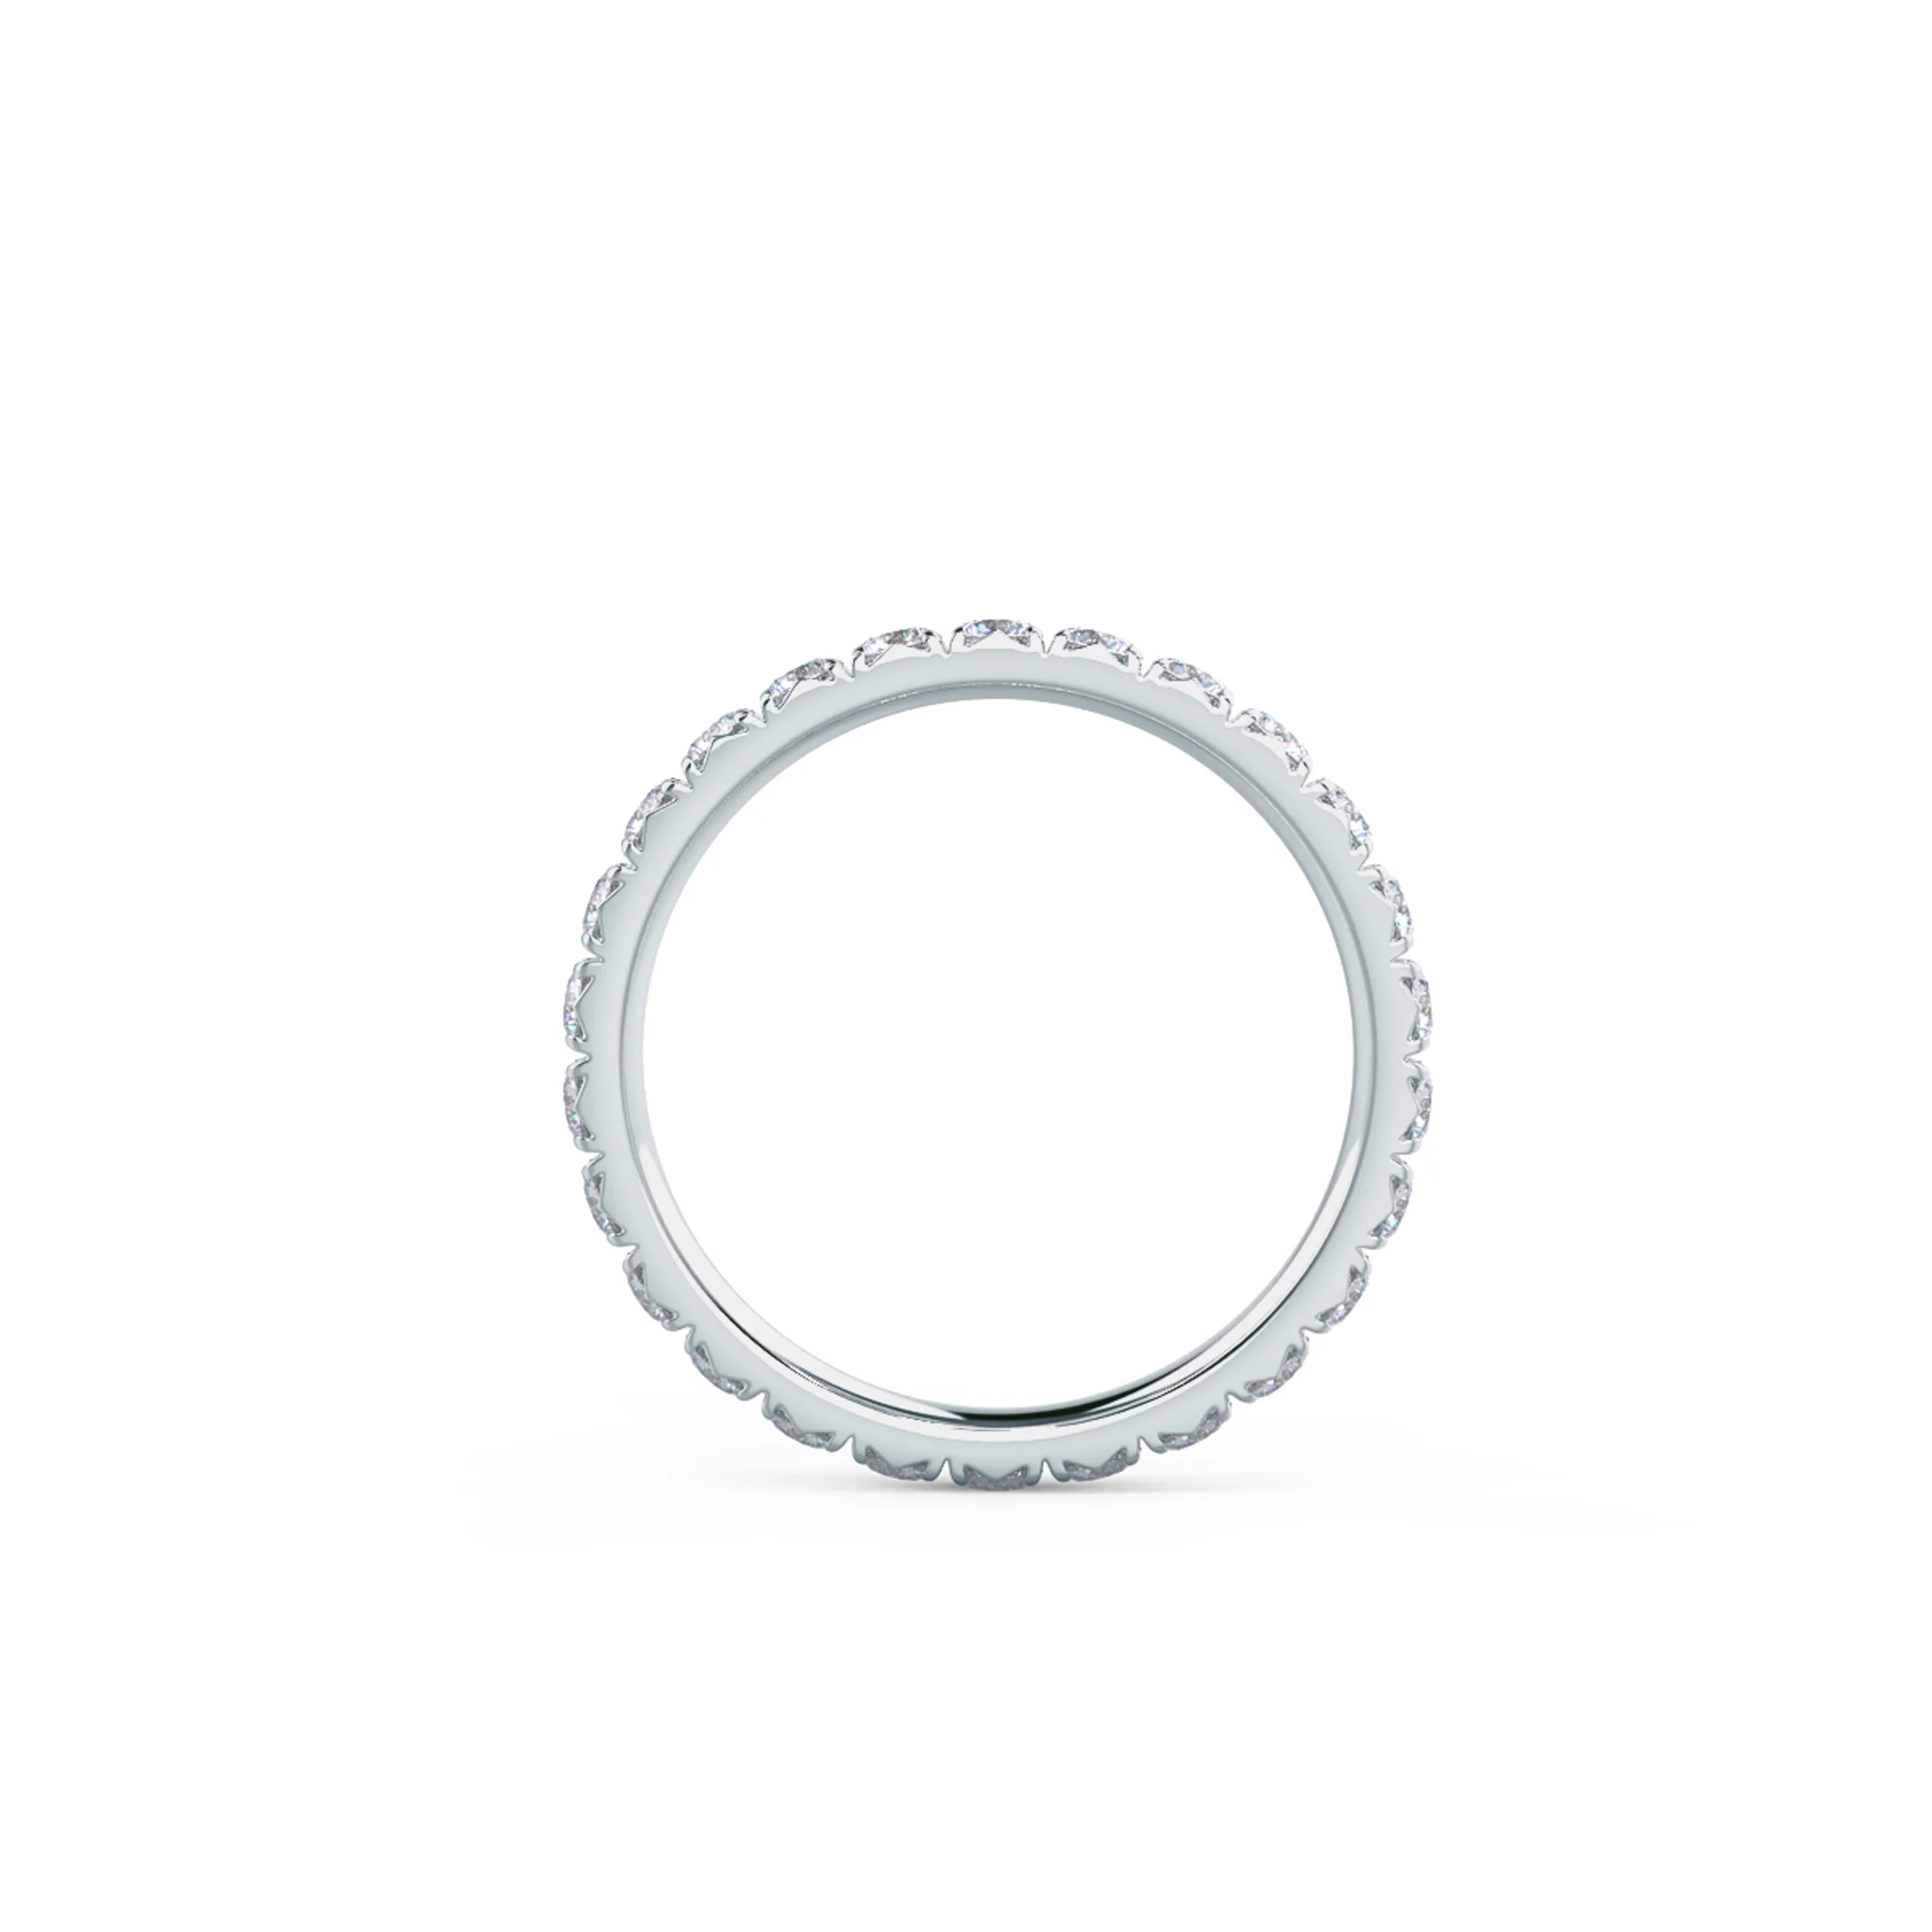 1.0 Carat Round Diamonds set in White Gold French Pavé Eternity Band (Profile View)